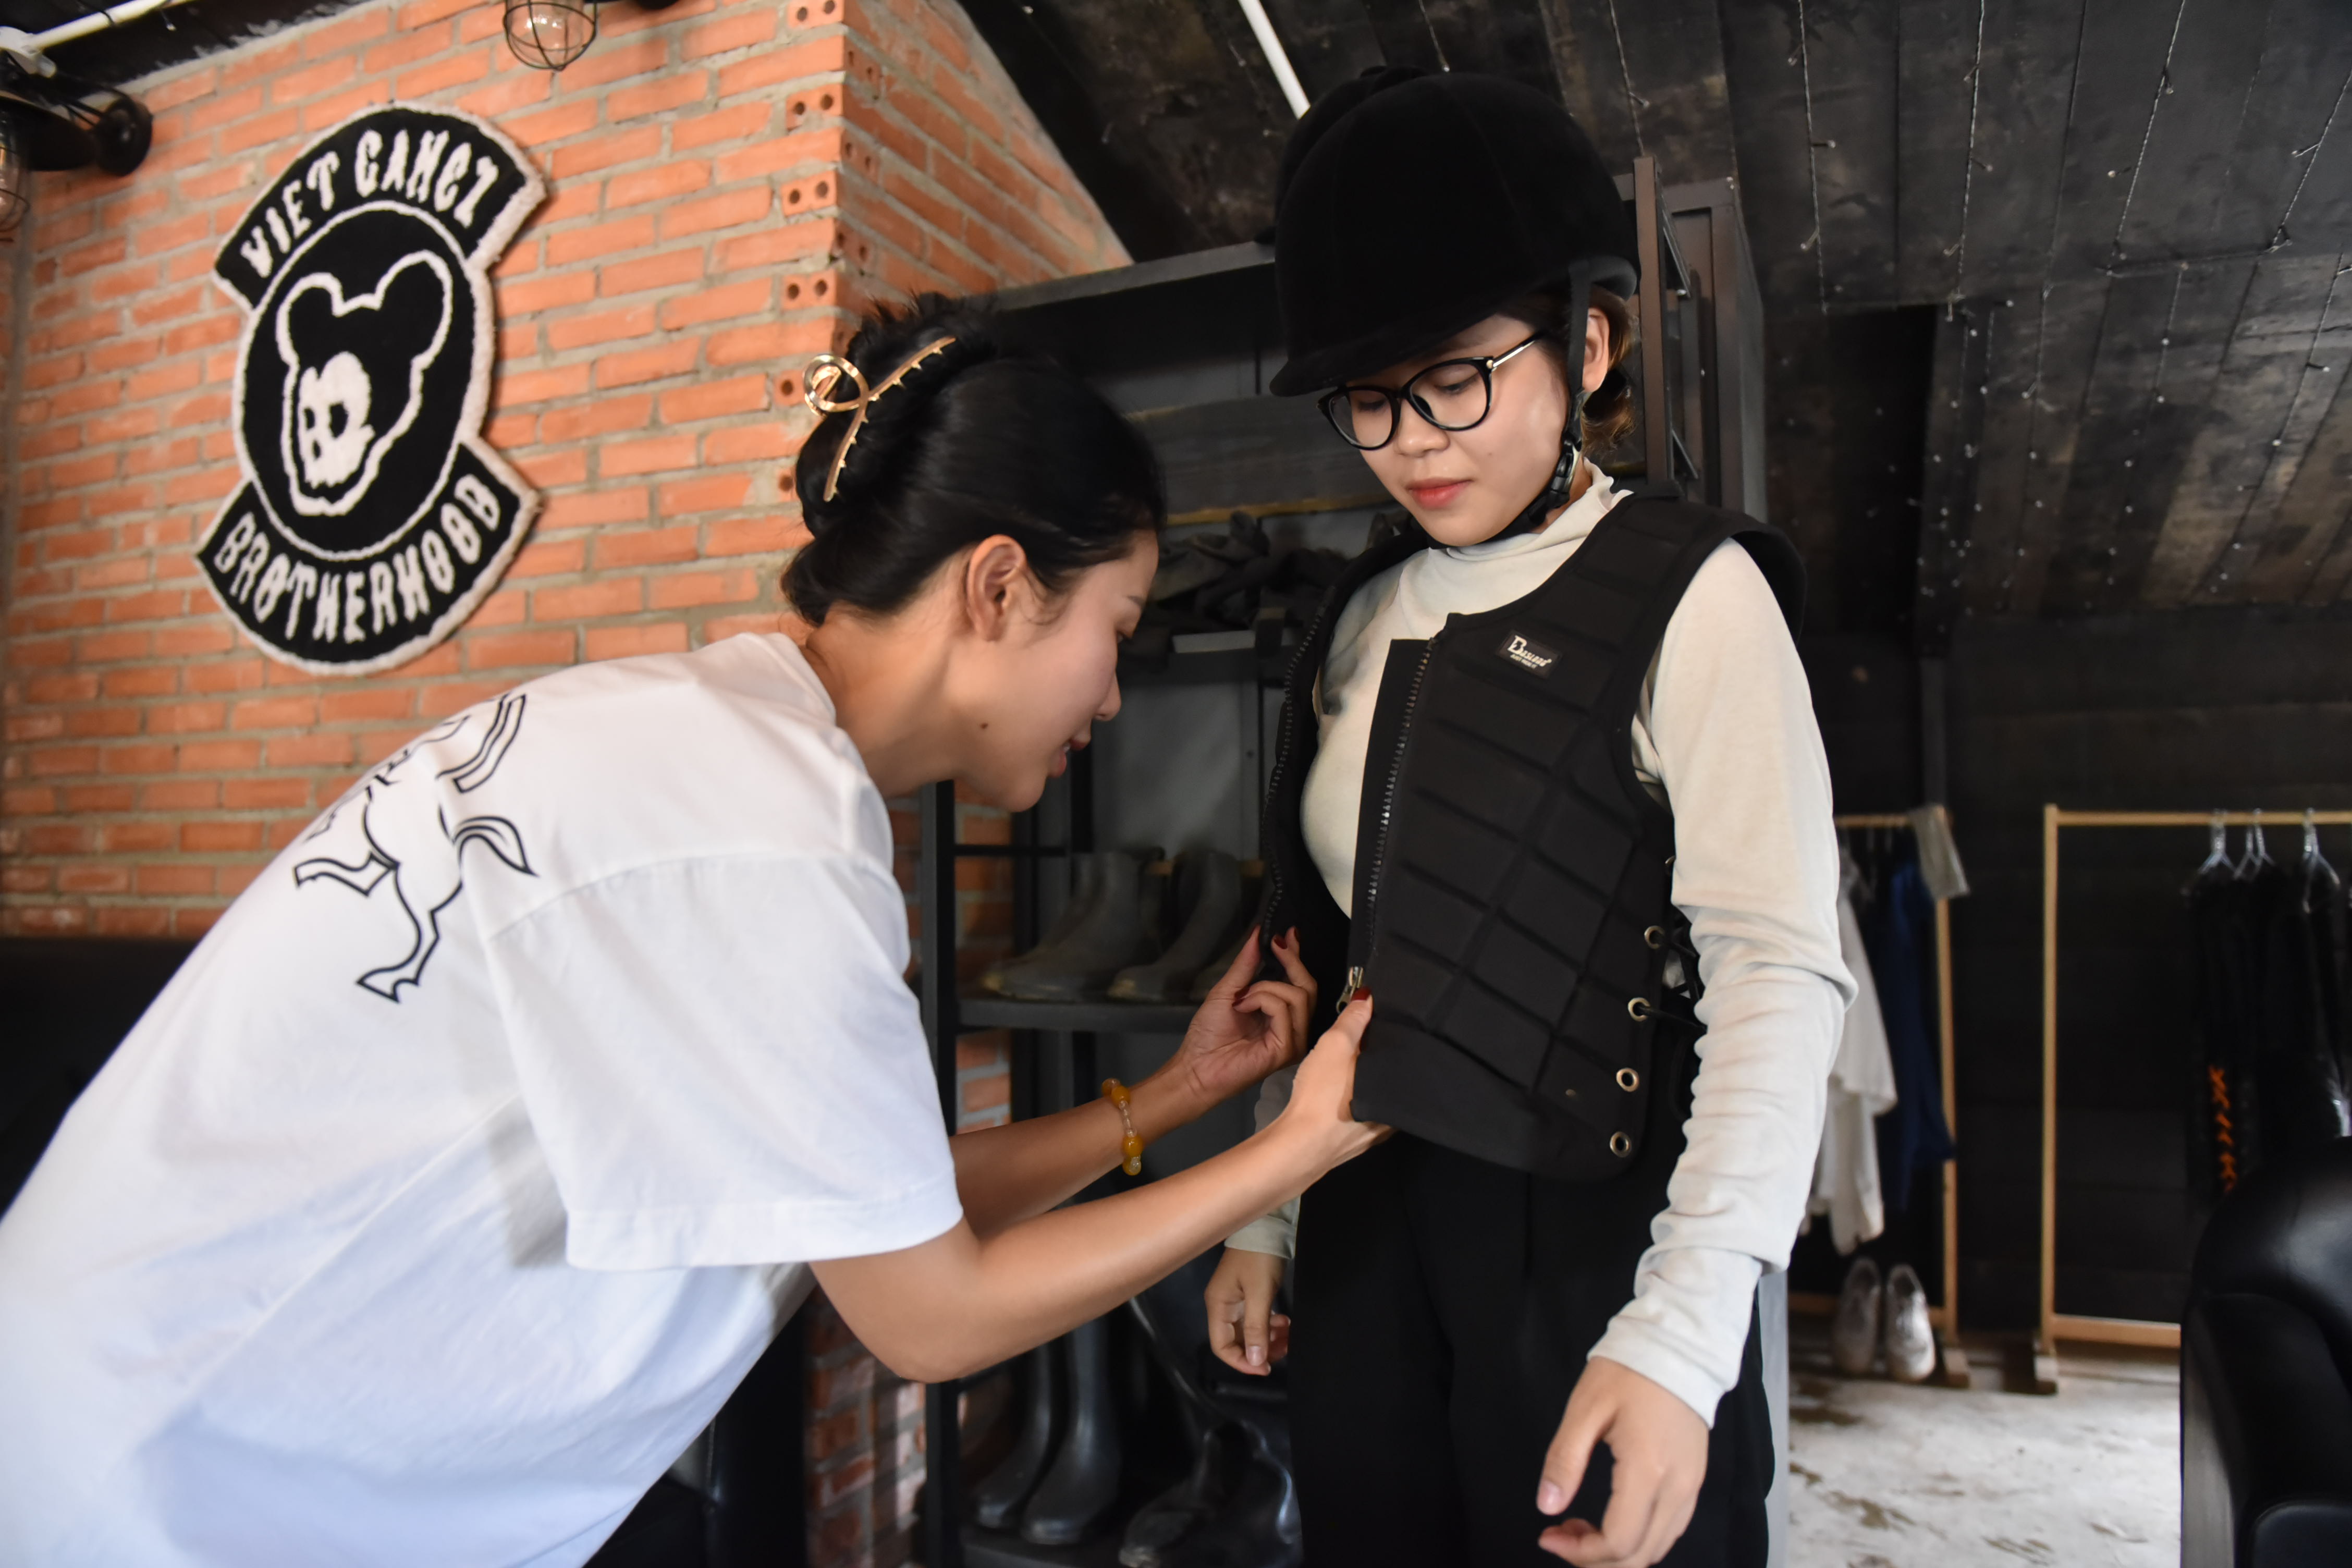 A staff member helps a rider put on safety equipment before mounting a horse at Vietgangz Horse Club, Thu Duc City. Photo: Ngoc Phuong / Tuoi Tre News